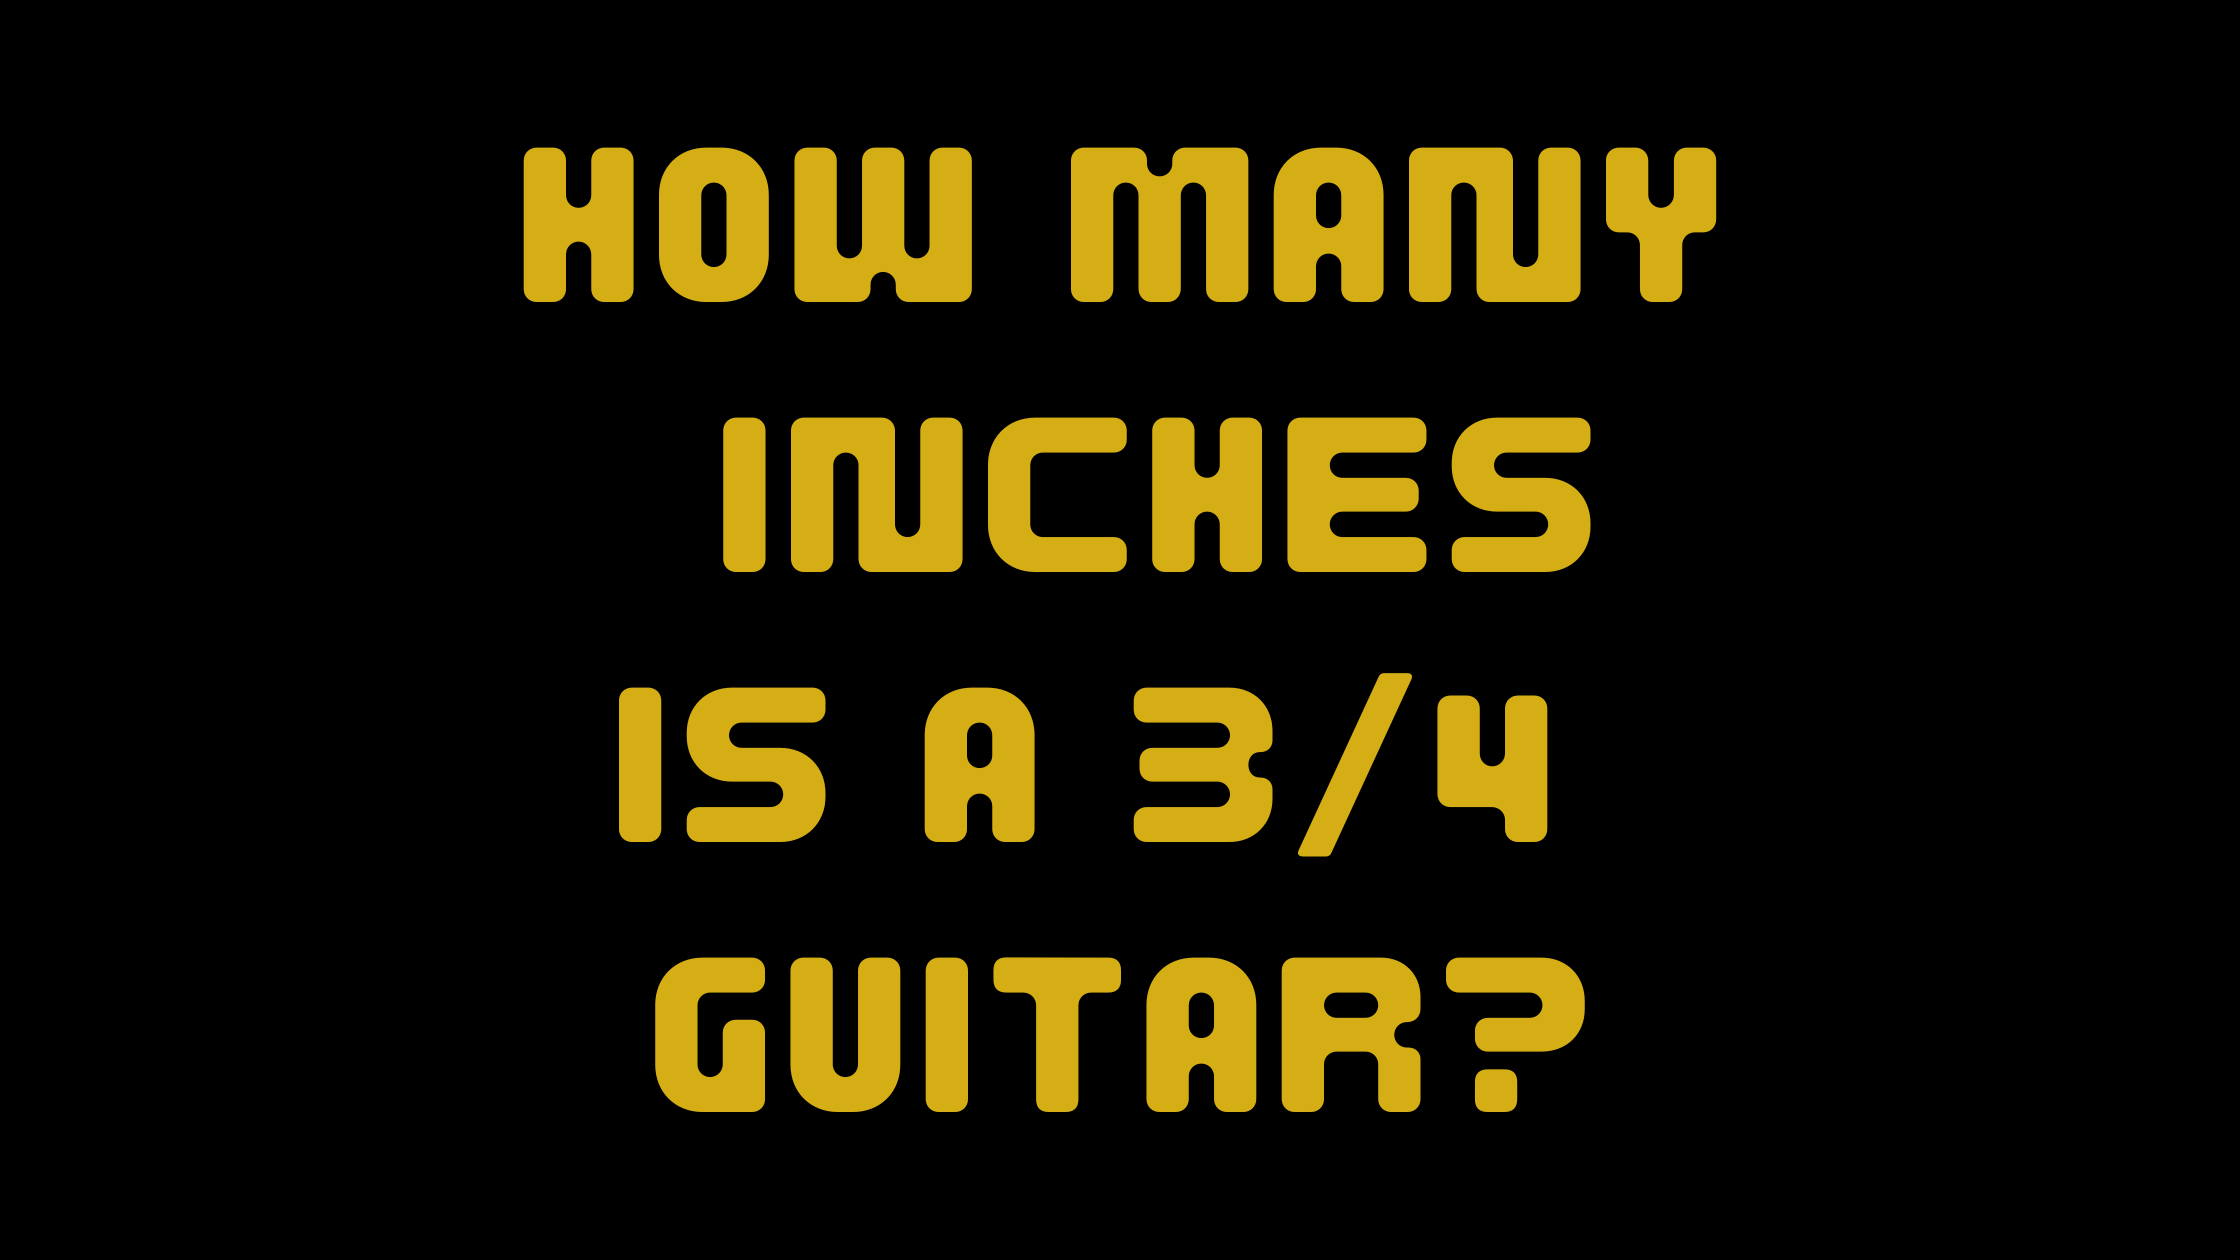 HOW MANY INCHES IS A 3/4 GUITAR?